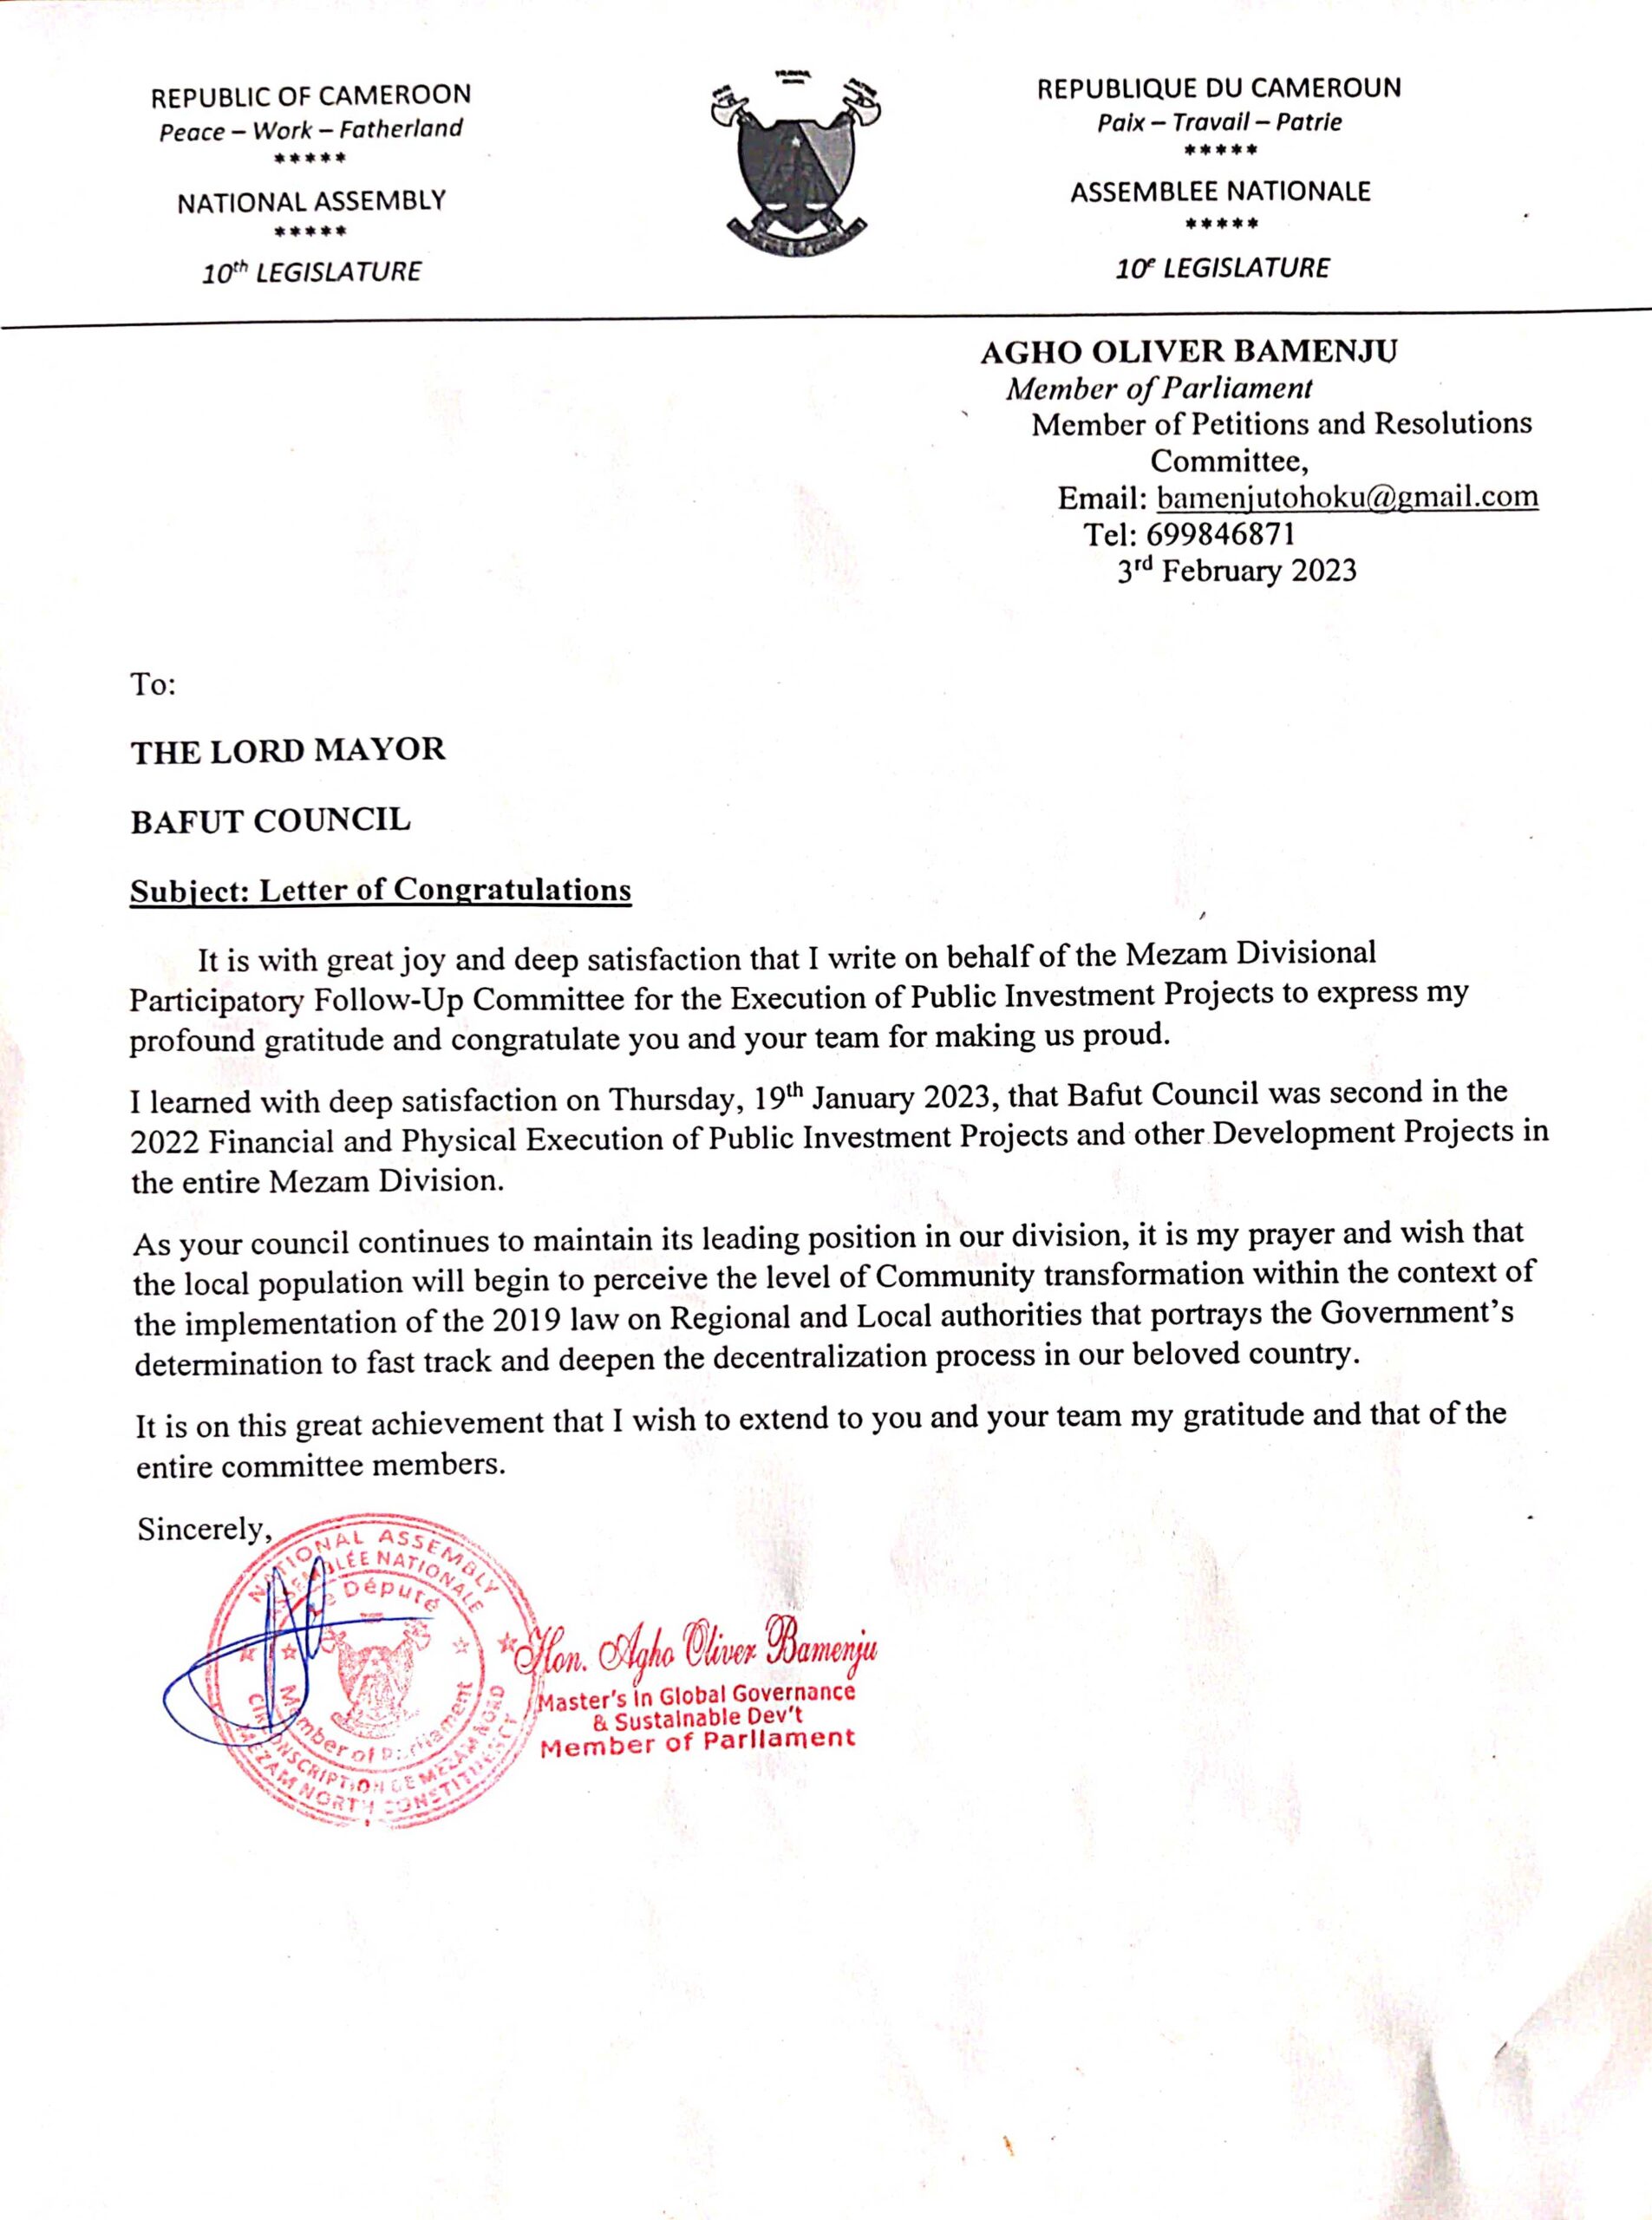 Bafut Council Congratulations Letter from Hon. Agho Oliver Bamenju